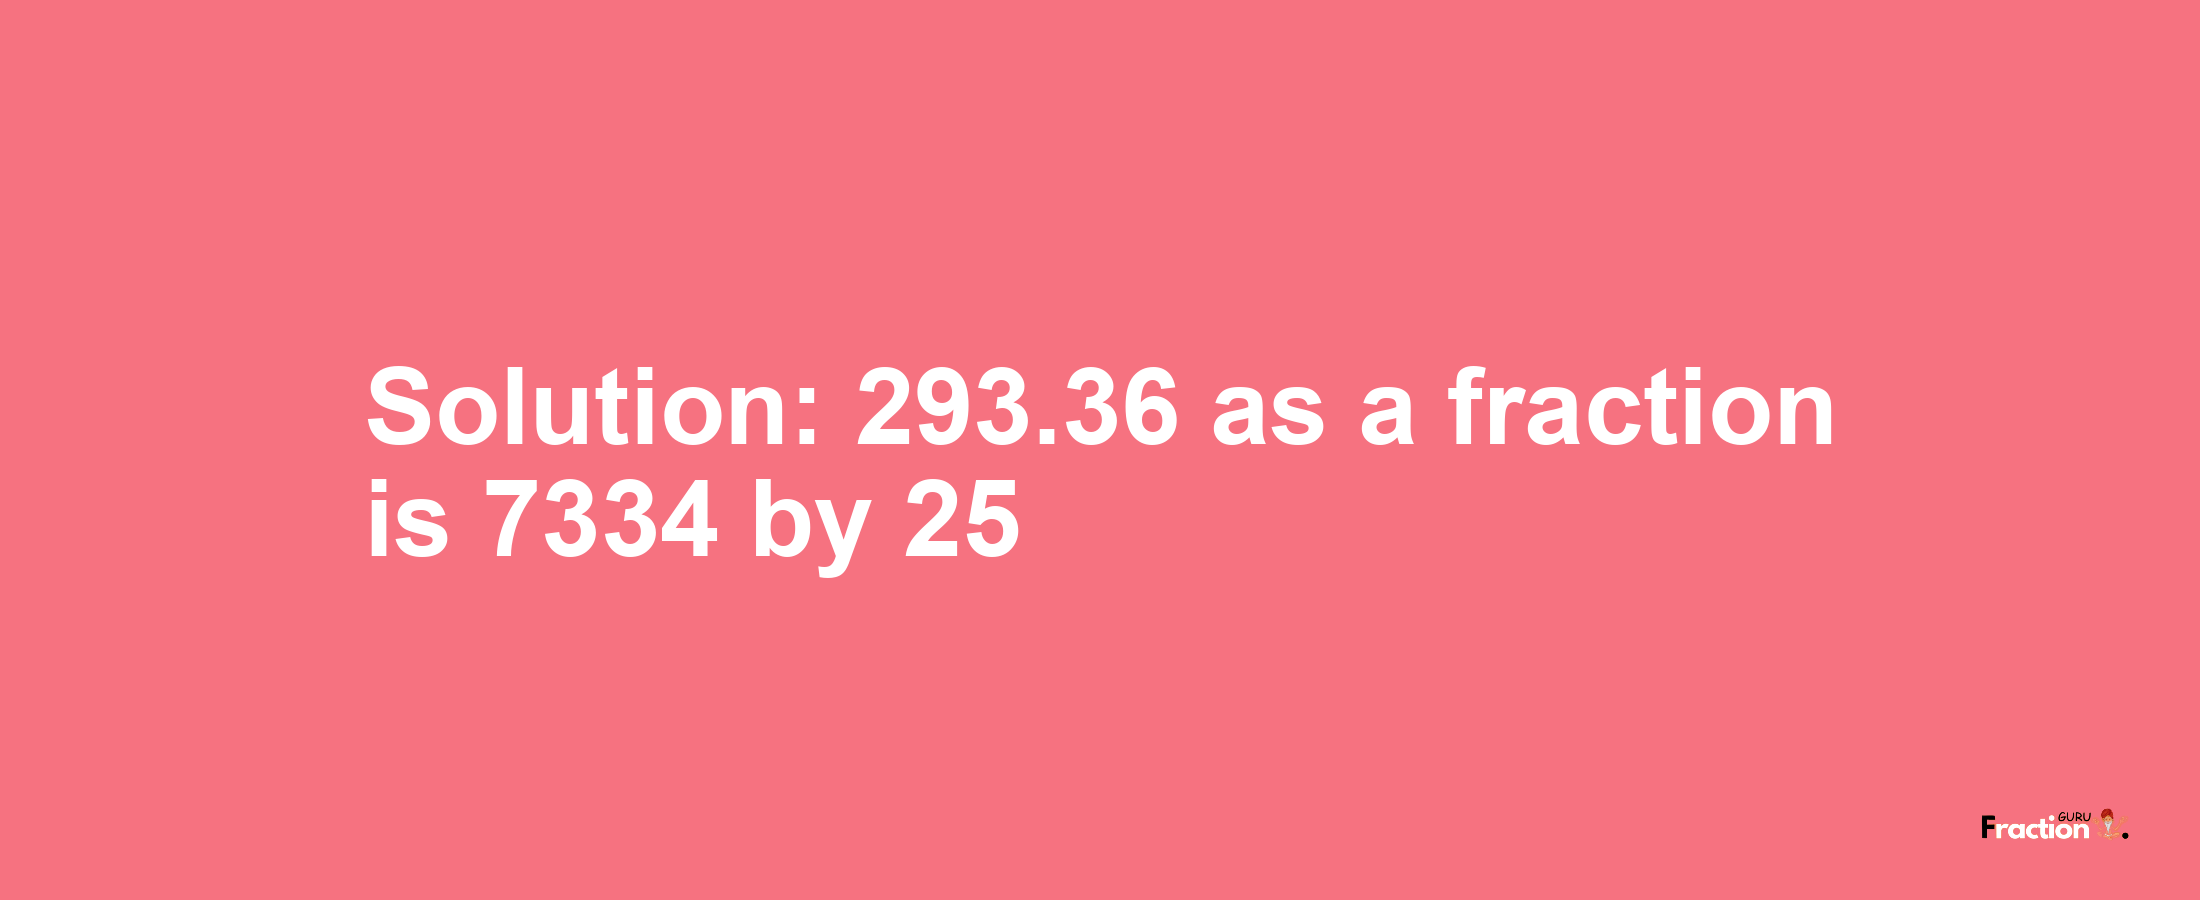 Solution:293.36 as a fraction is 7334/25